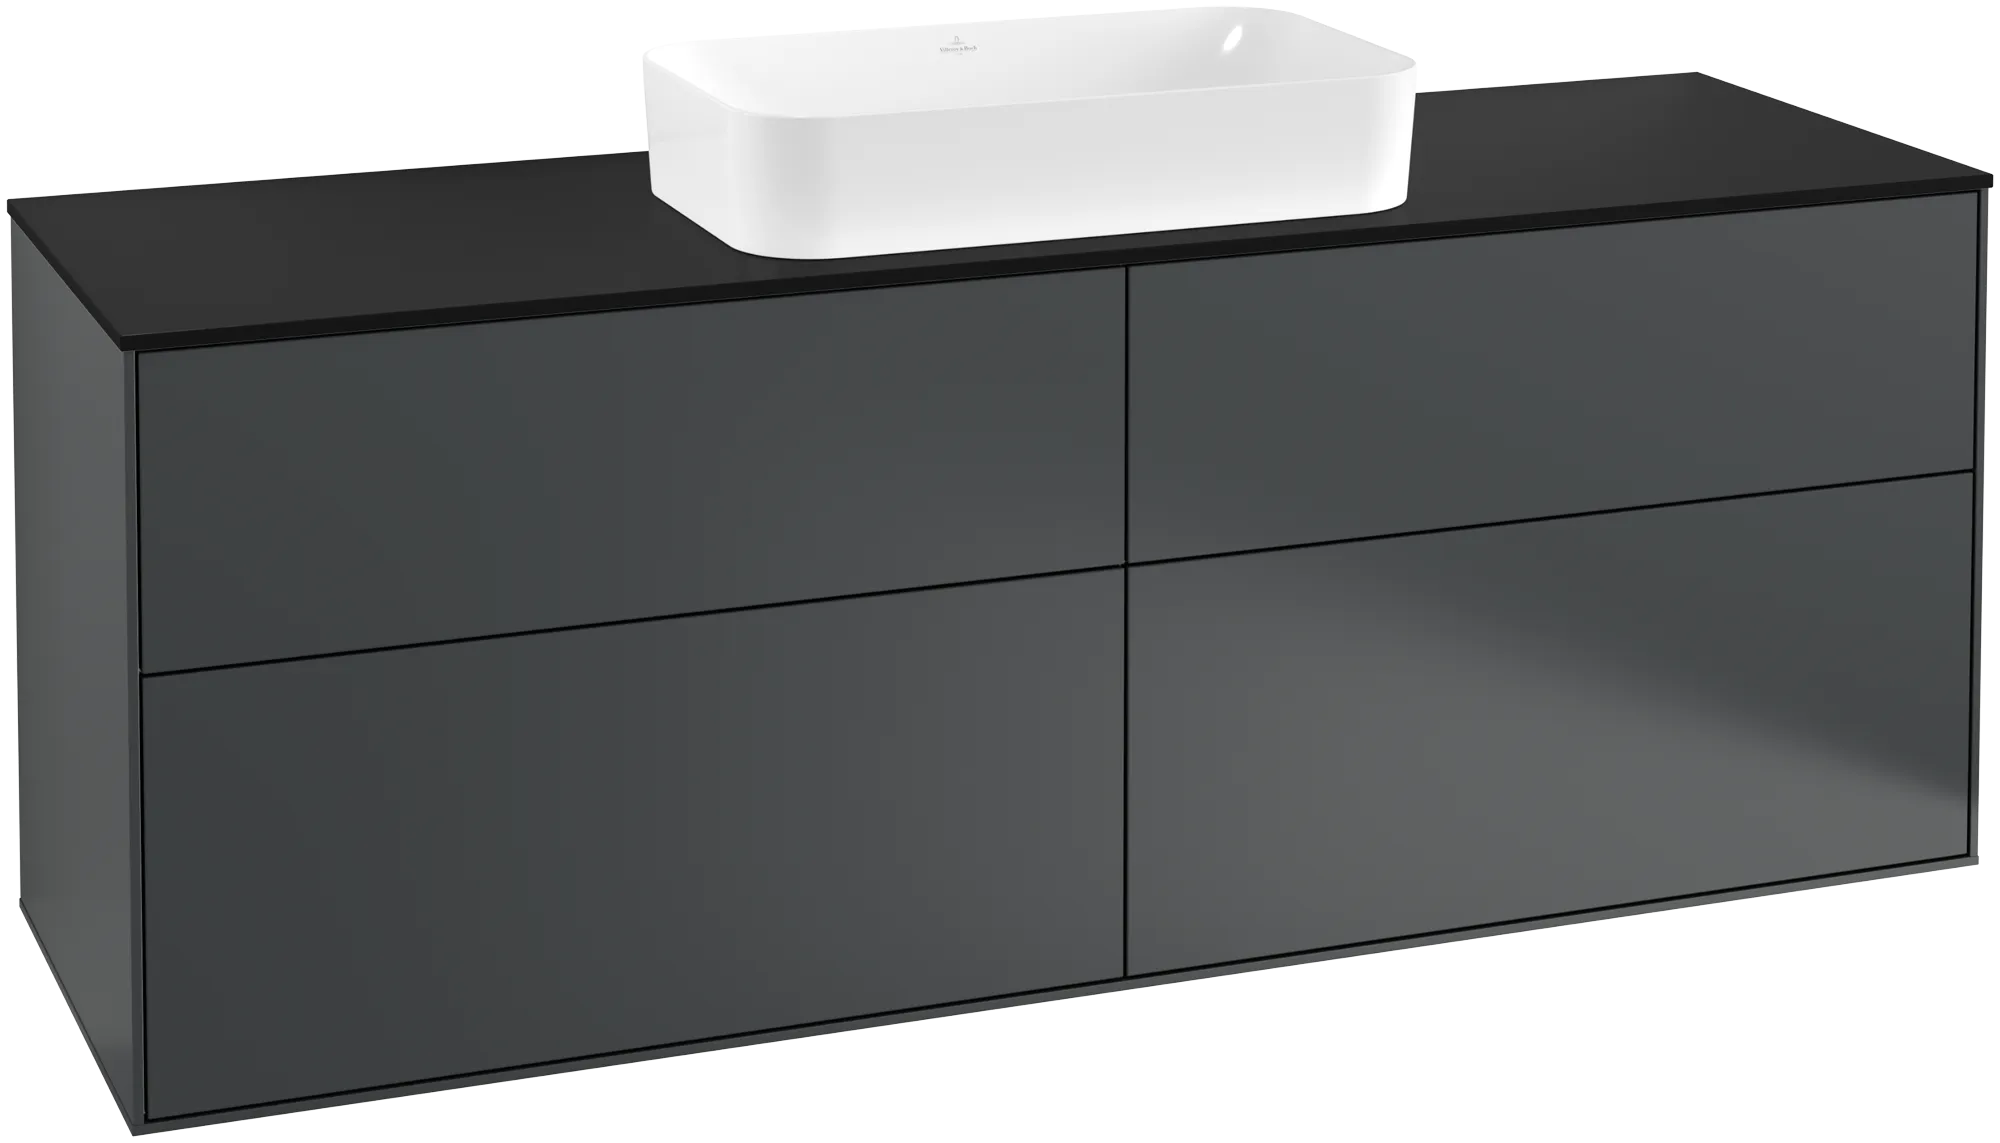 Picture of VILLEROY BOCH Finion Vanity unit, with lighting, 4 pull-out compartments, 1600 x 603 x 501 mm, Midnight Blue Matt Lacquer / Glass Black Matt #G32200HG